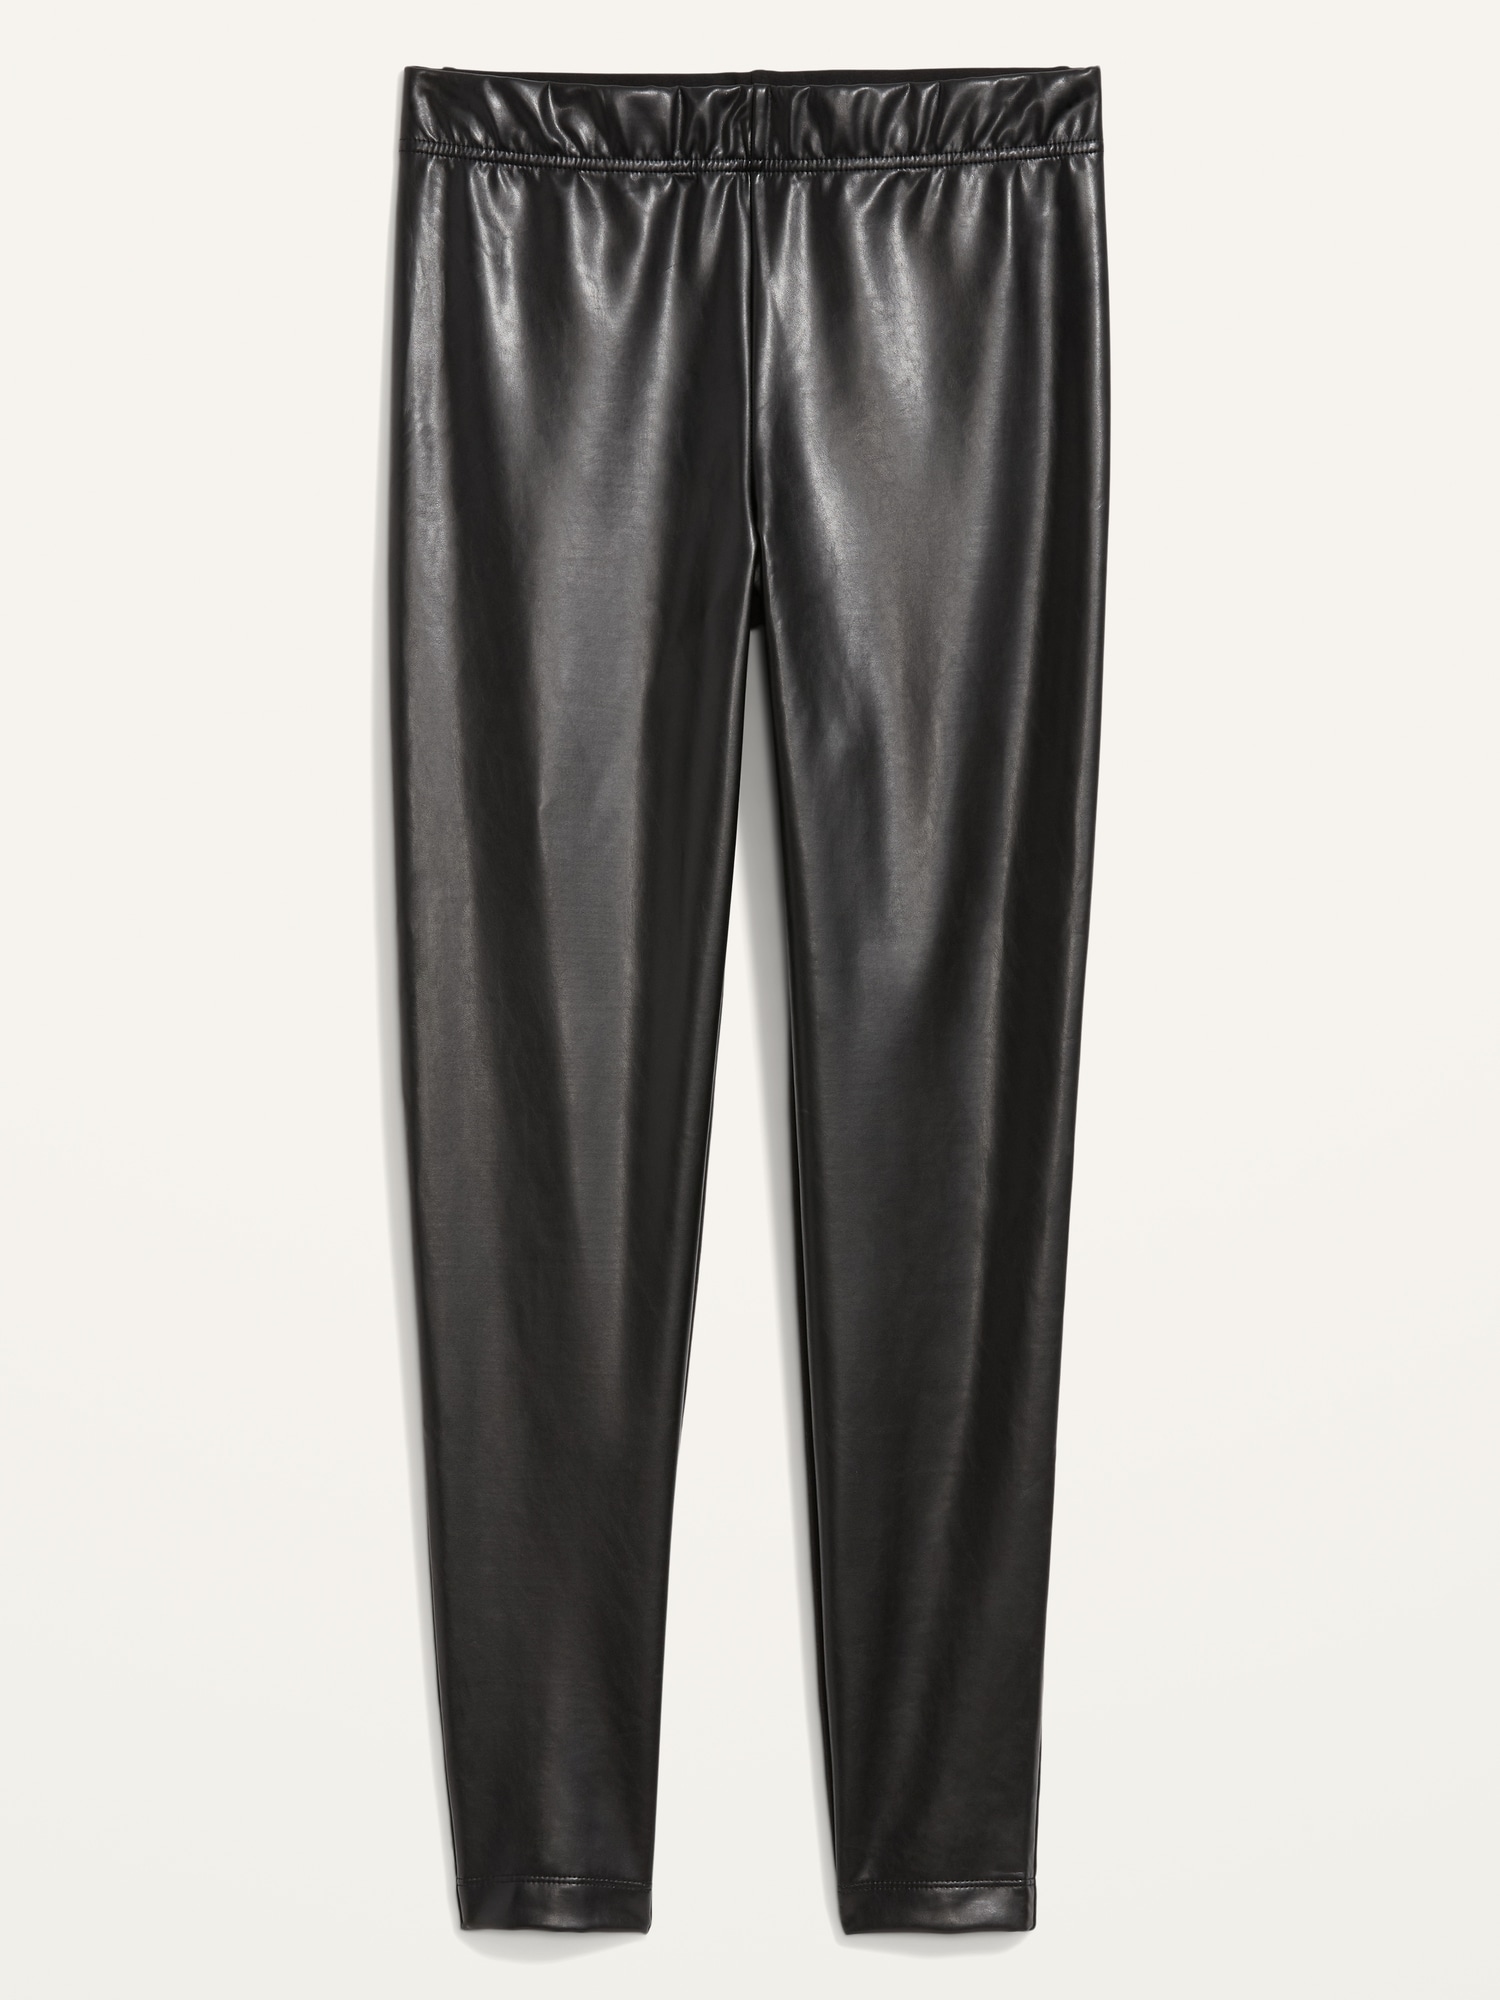 Rubelle Faux Leather Zip Detailed Thermal High Waist Leggings